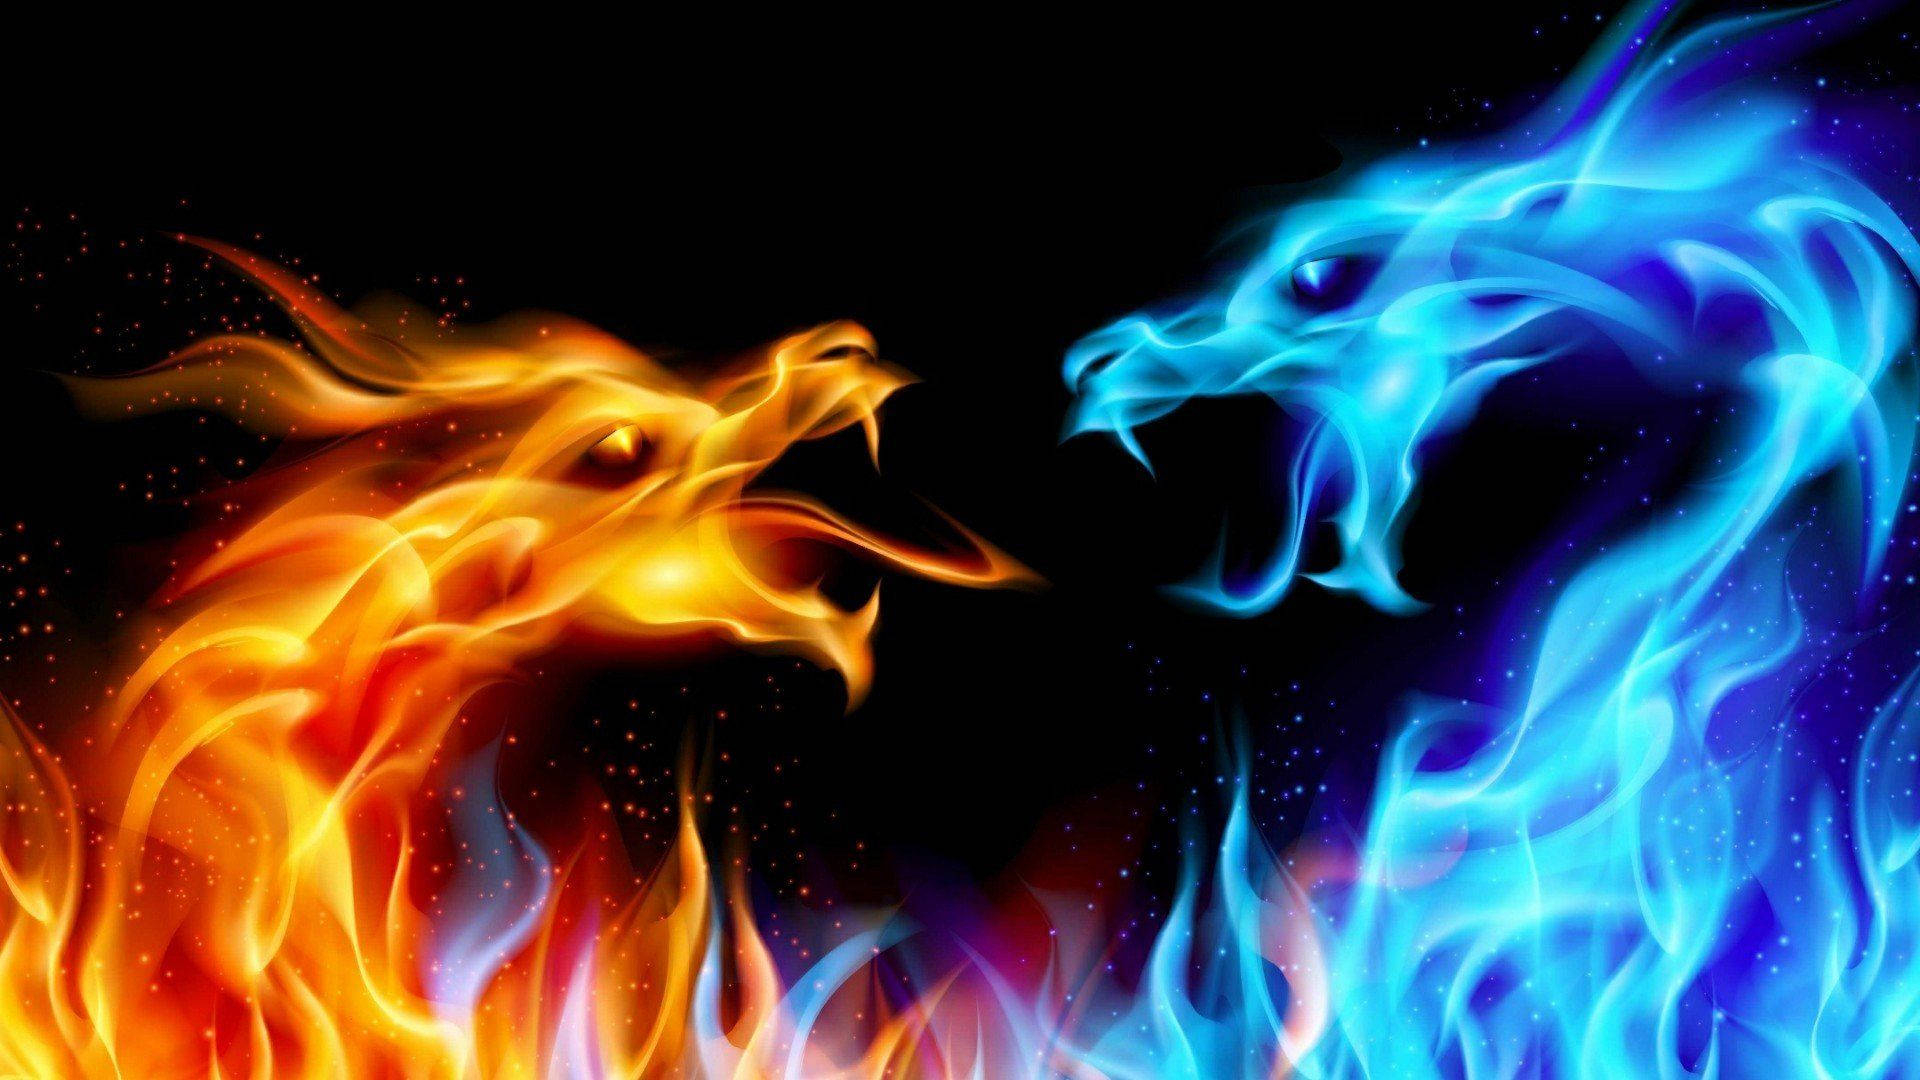 1920x1080 Download Dragons Red And Blue Flames Art Wallpaper